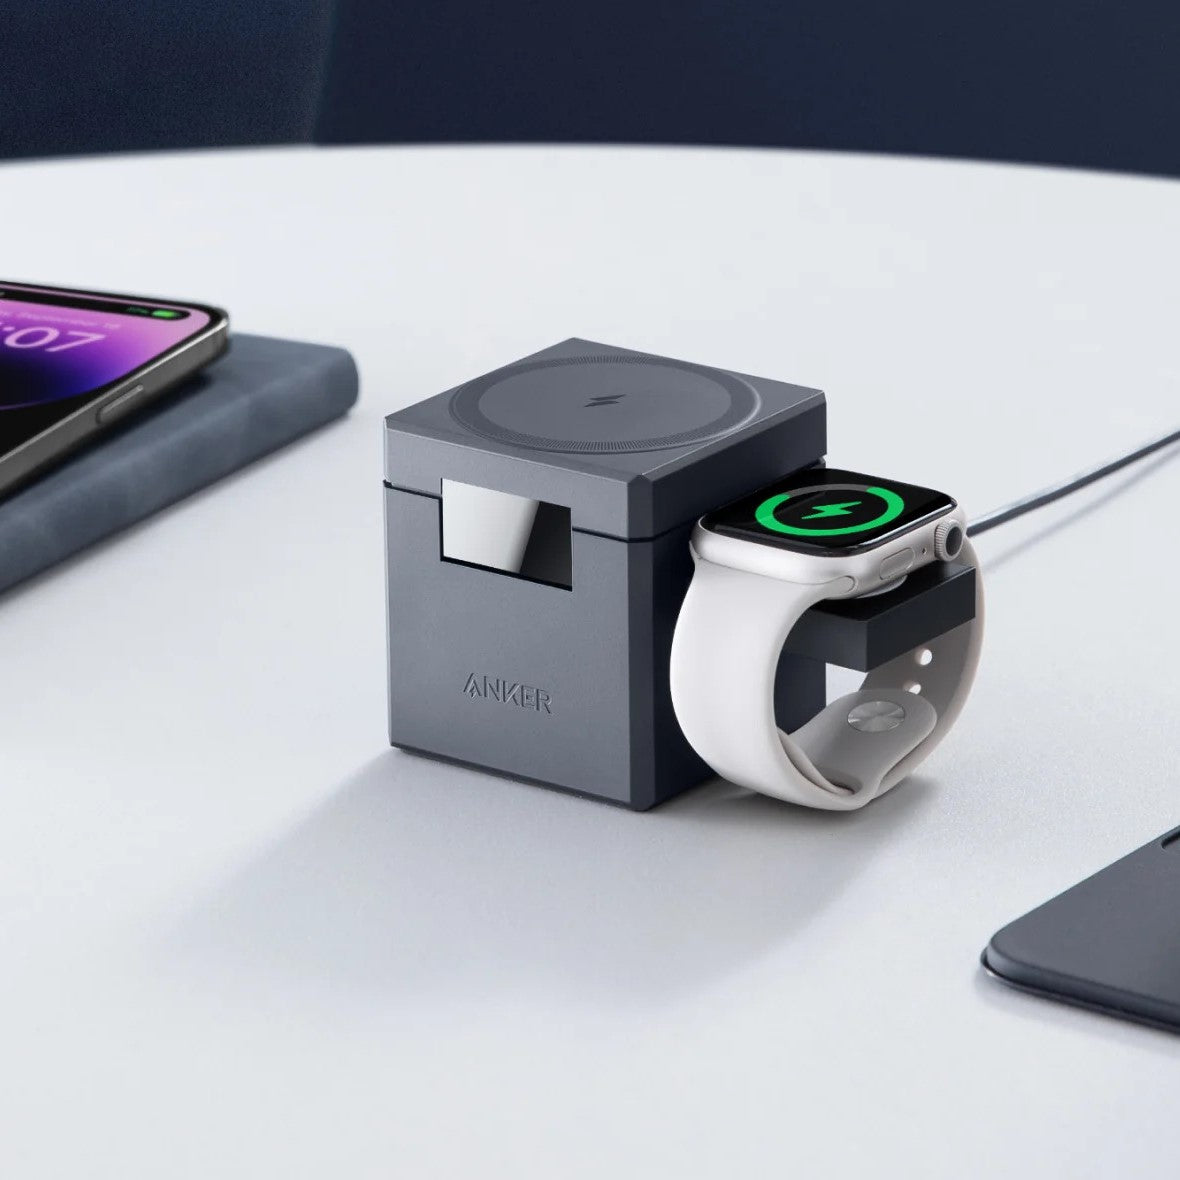 Anker's new $8 accessory adds MagSafe to ordinary iPhone 12 and 13